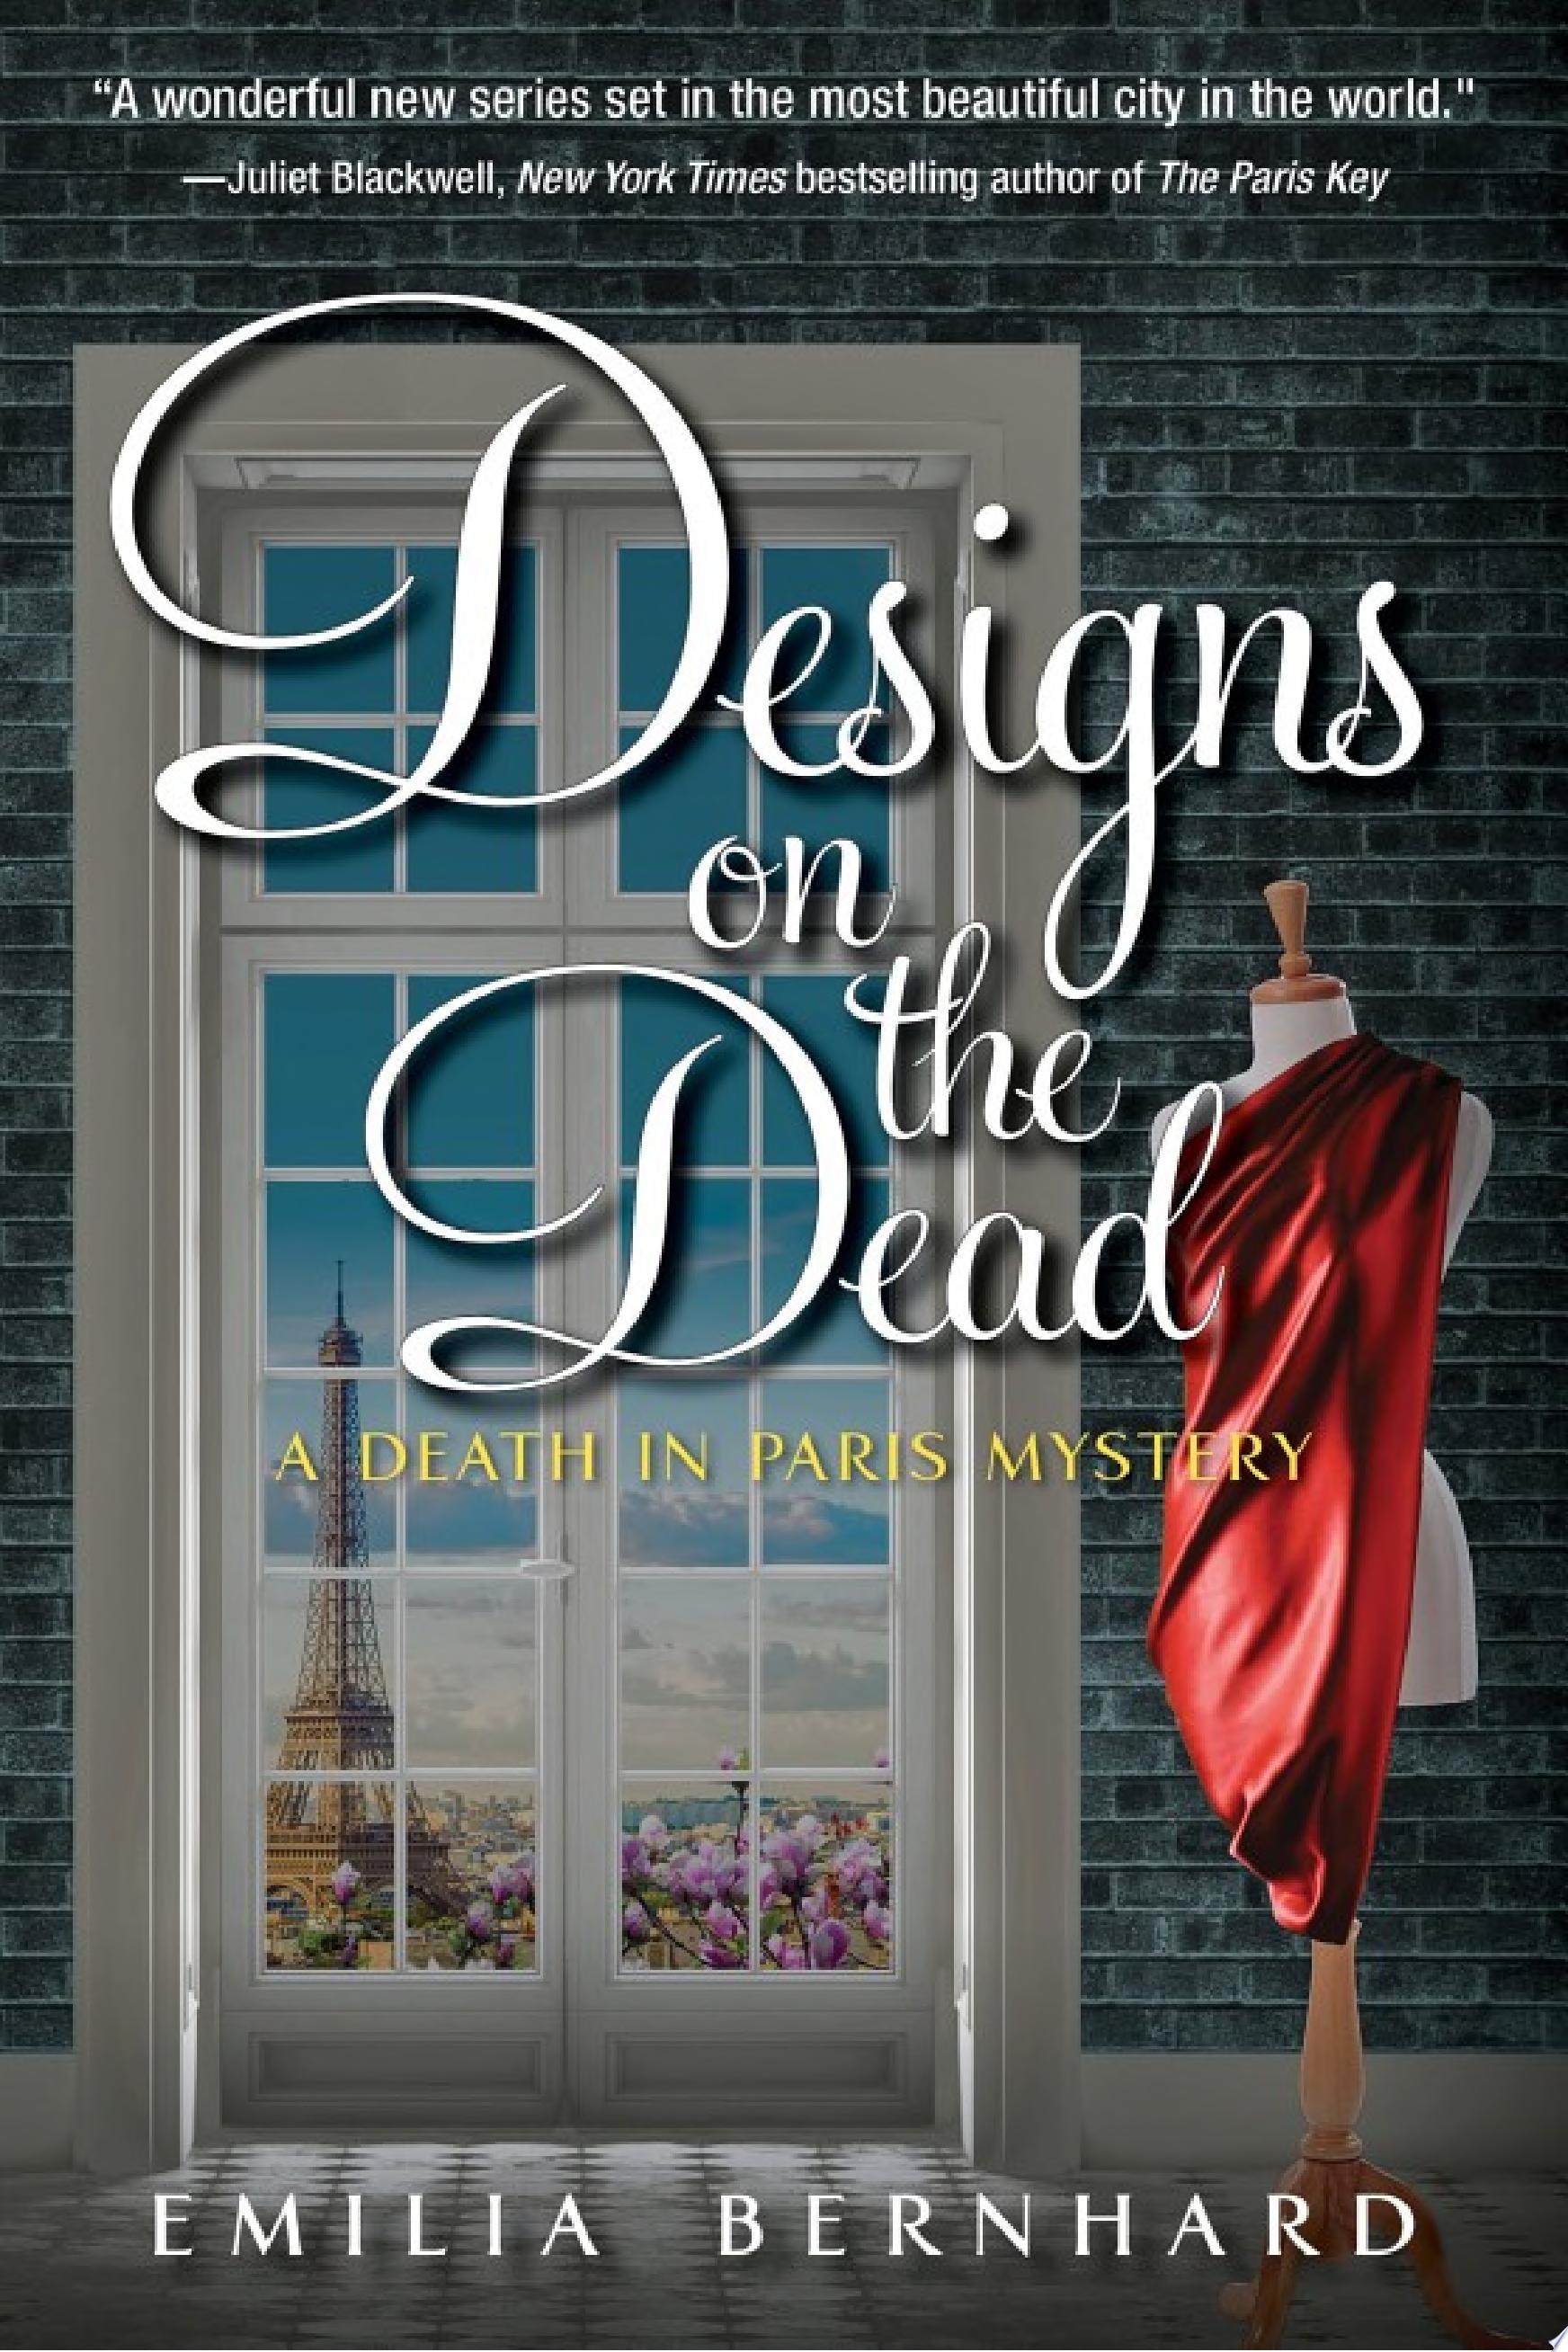 Image for "Designs on the Dead"